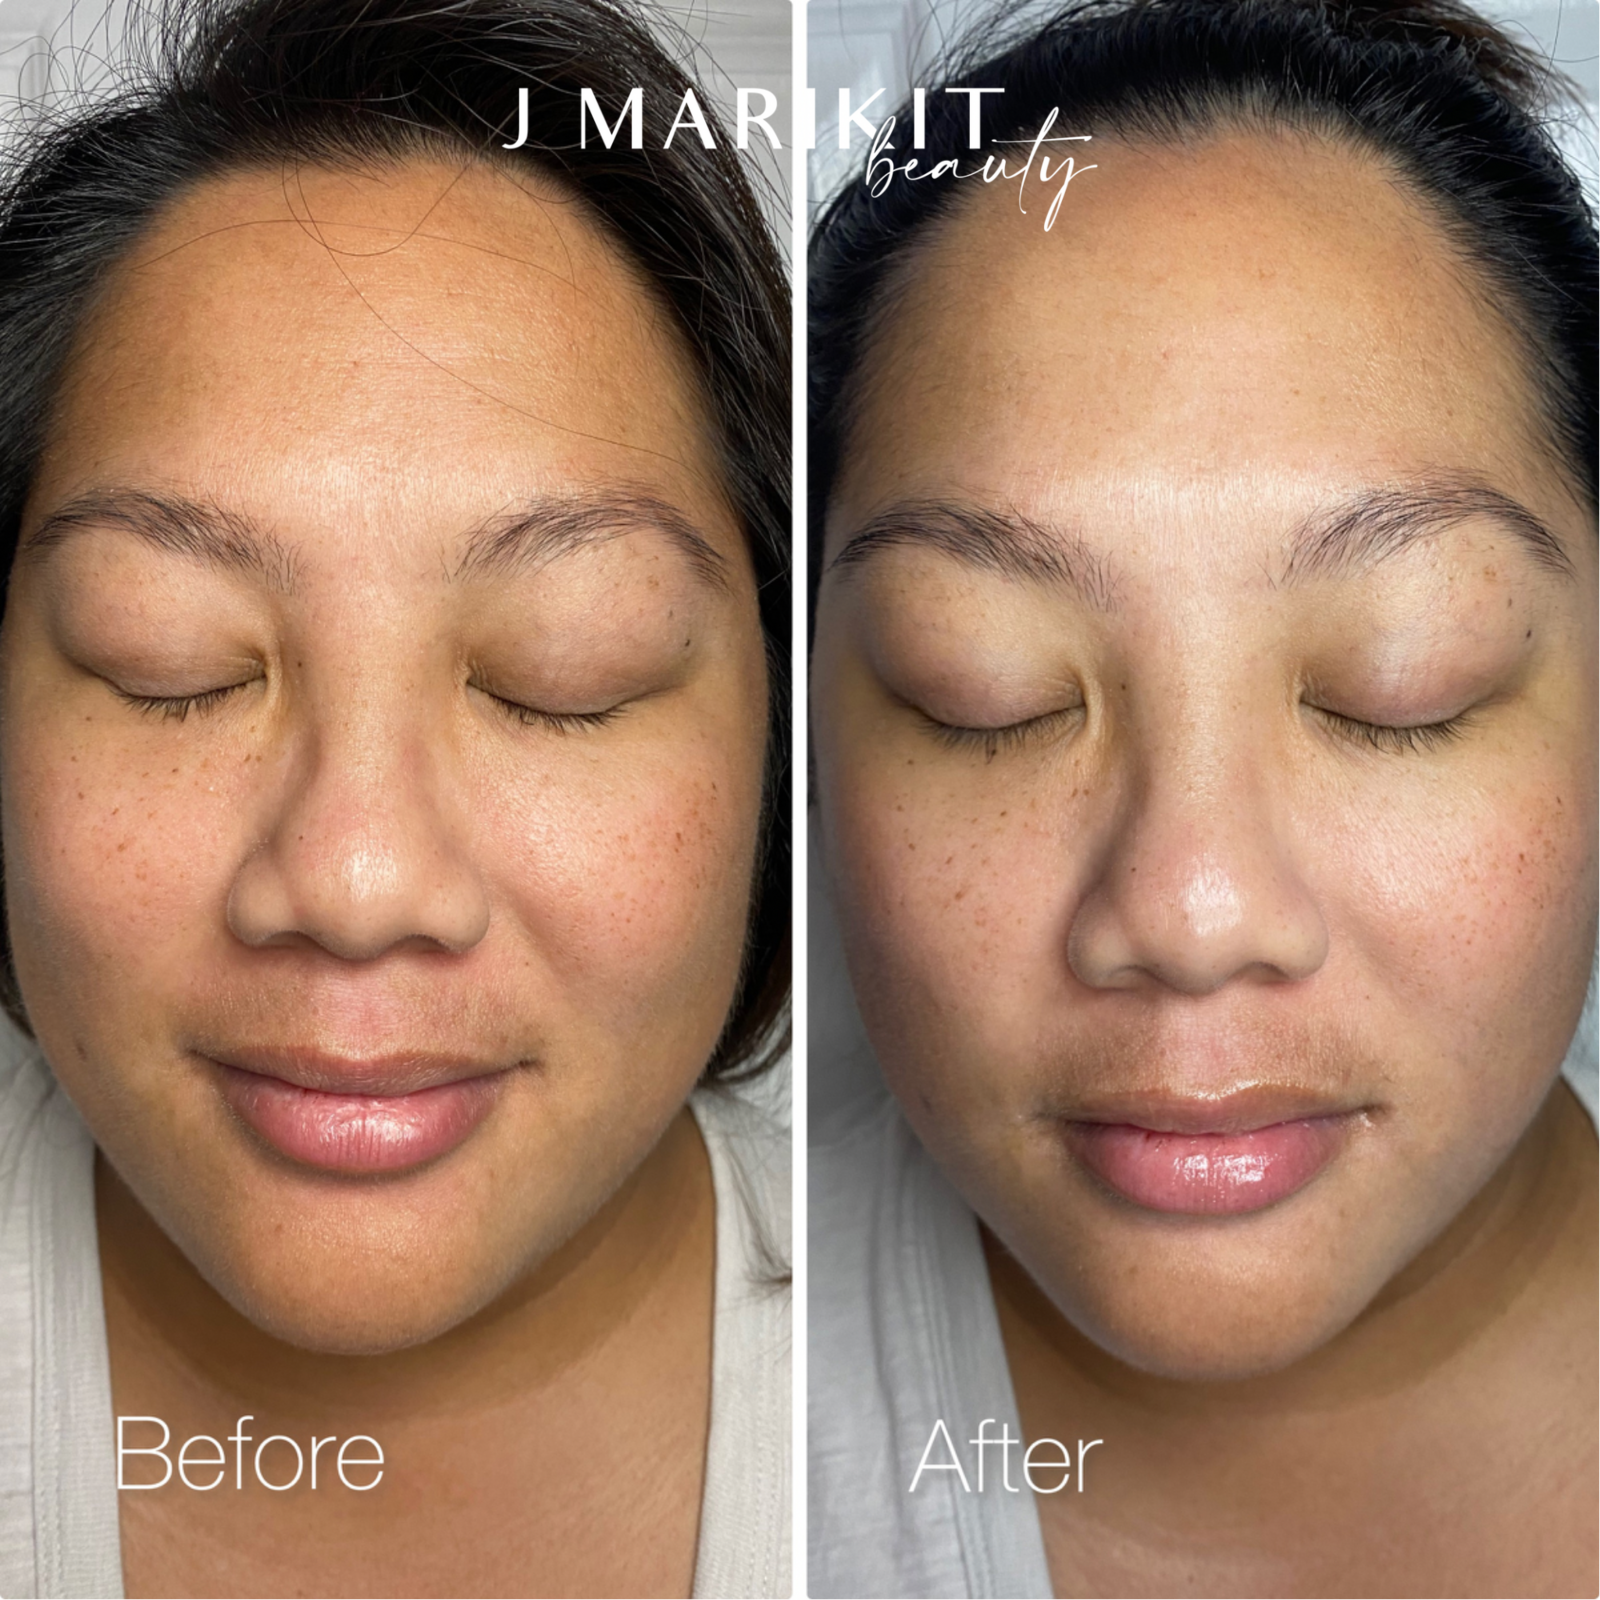 Oahu chemical peel before and after images.